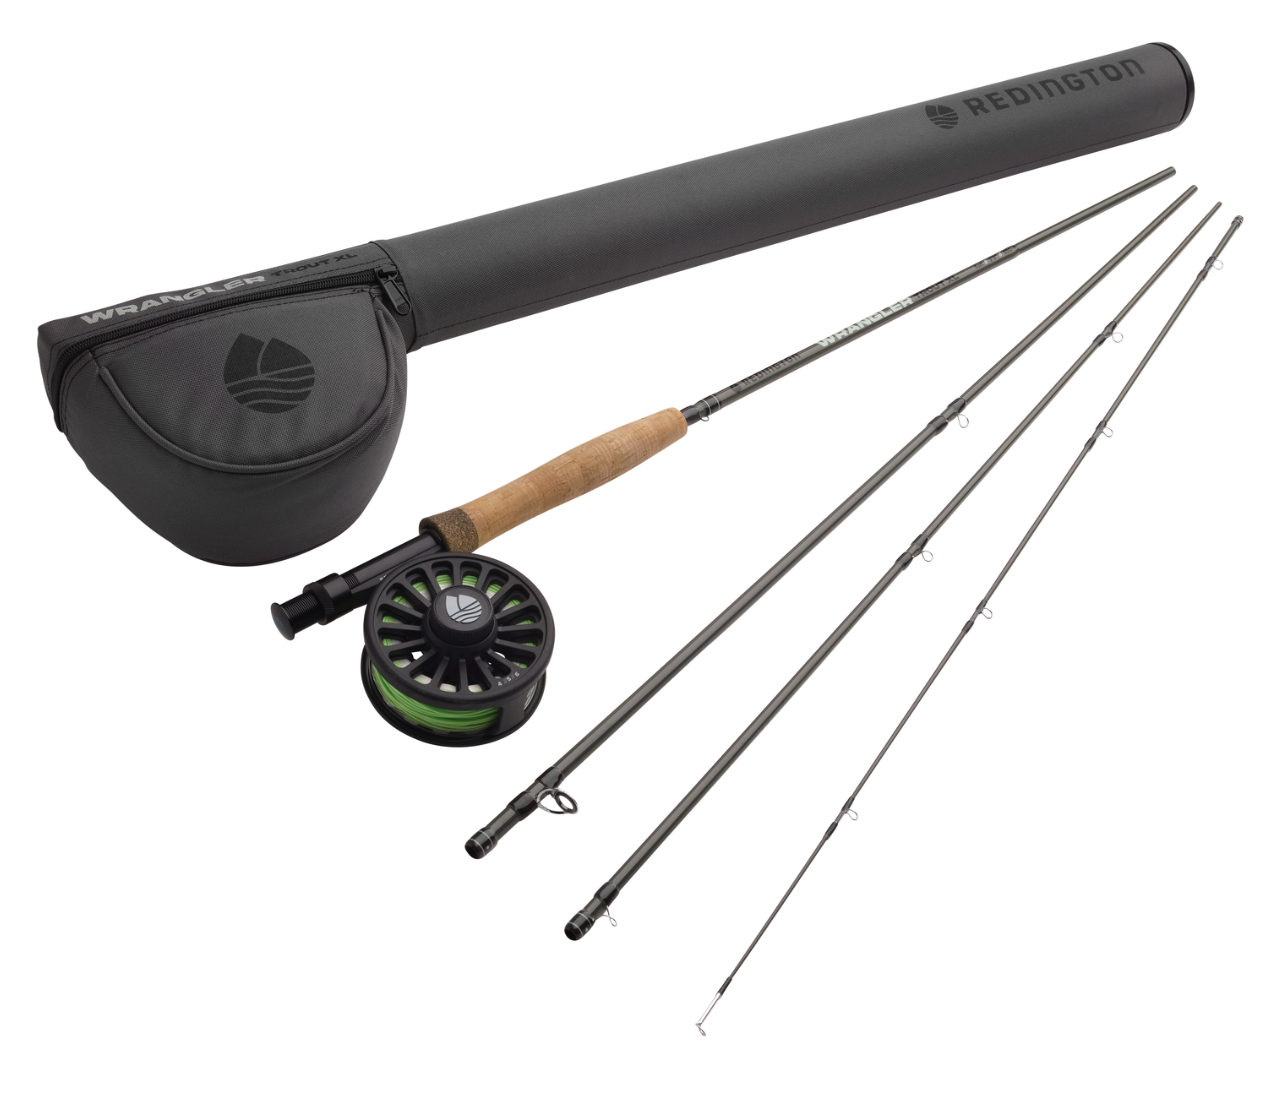 Redington Wrangler Trout XL Kit 690-4, Buy Trout Fly Fishing Kits, 6wt Fly  Rod Outfit, Best Trout Fly Rods Online